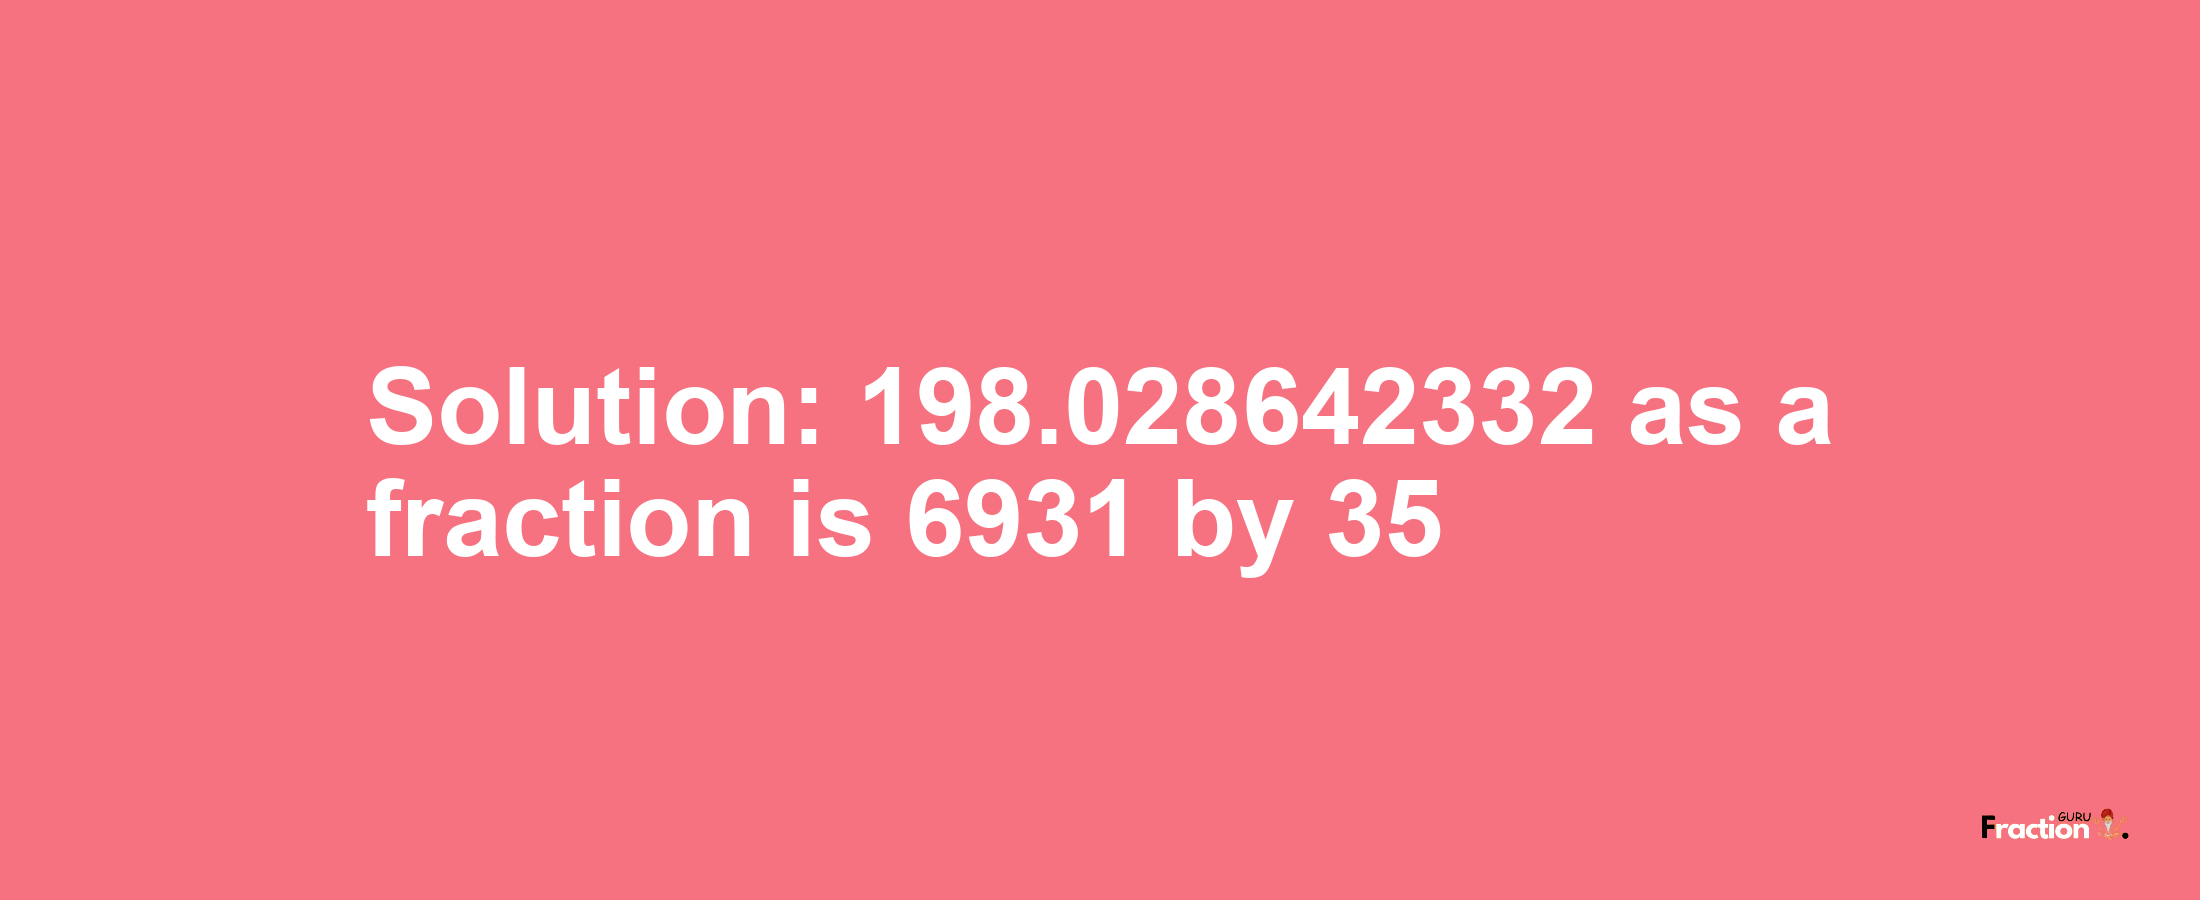 Solution:198.028642332 as a fraction is 6931/35